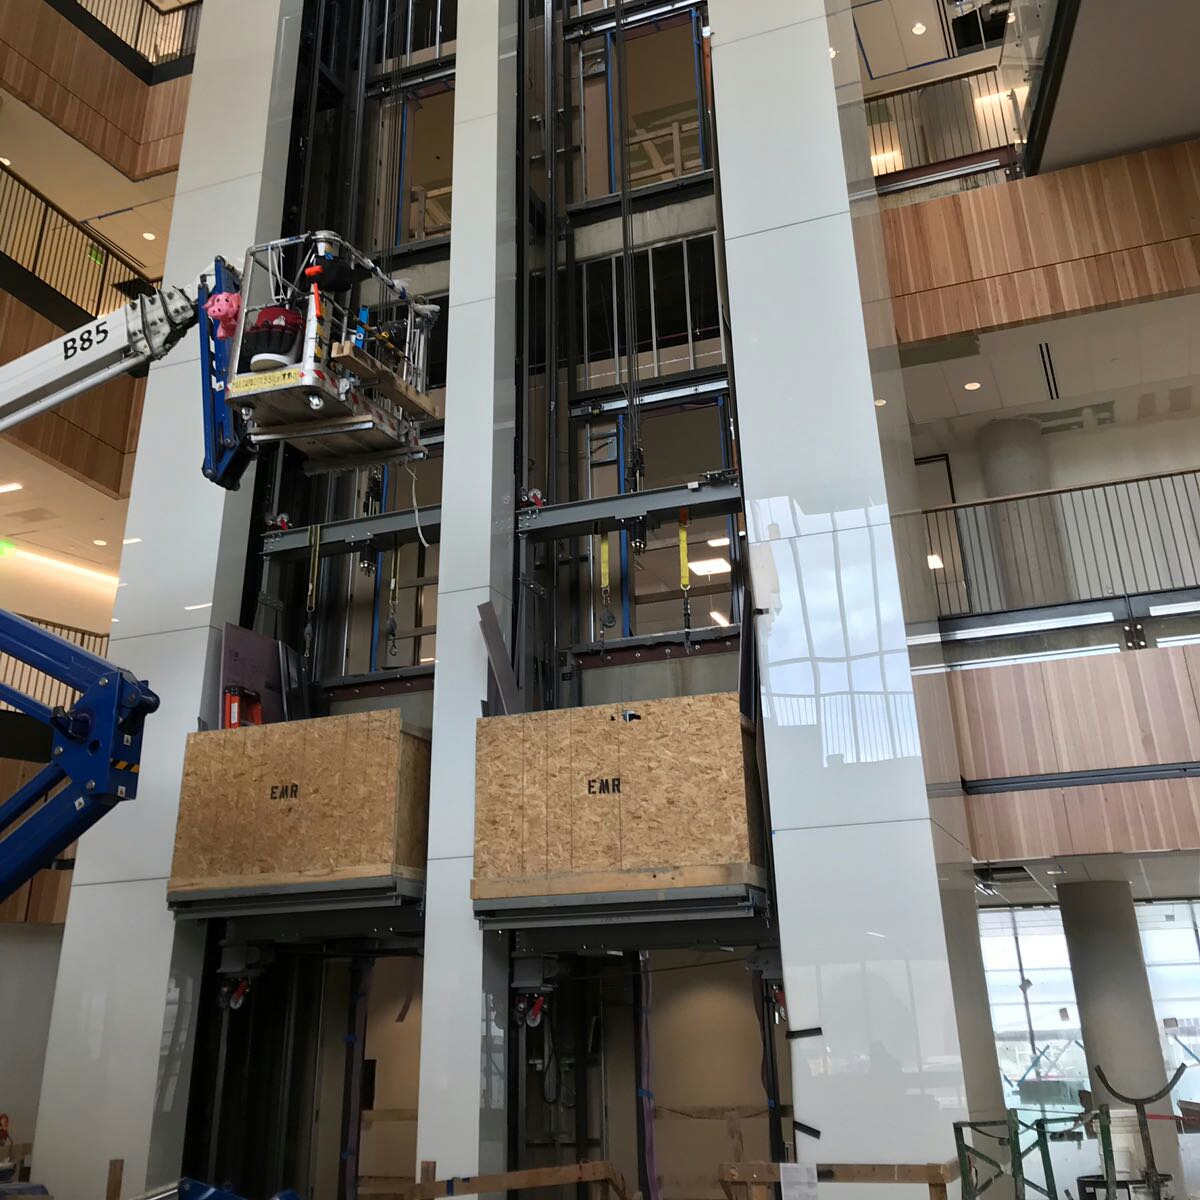 Elevator construction for the future site of the Texas MBA, Rowling Hall.